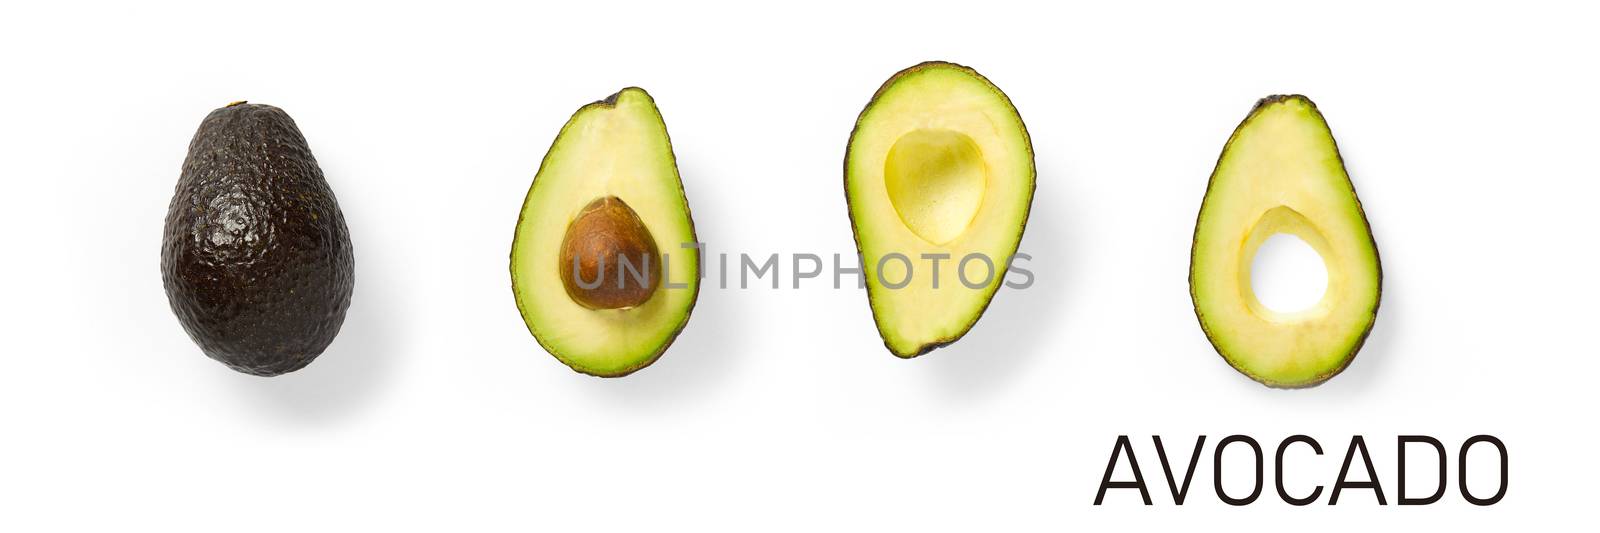 Modern creative avocado collage with simple text on solid color background. Avocado slices creative layout on White background. Flat lay, Food concept by PhotoTime